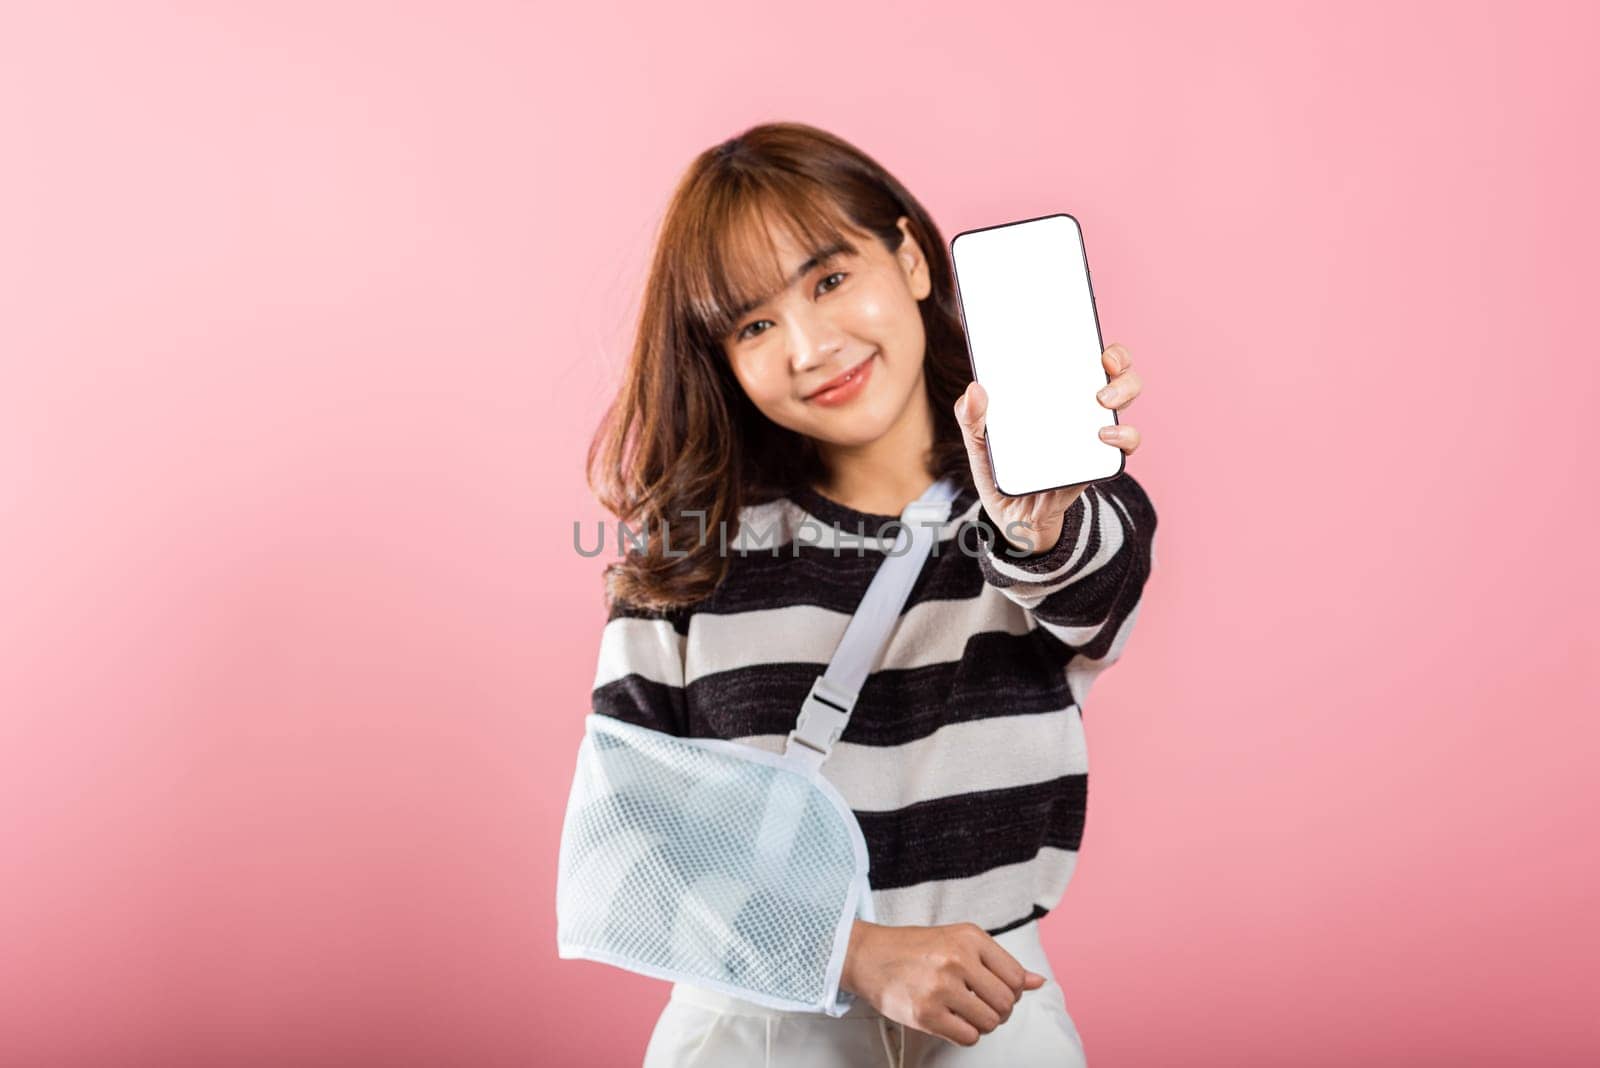 Happy Asian woman with a broken arm, wearing an arm splint, smiles while displaying her smartphone screen. Coping with pain and recovery, isolated on pink.